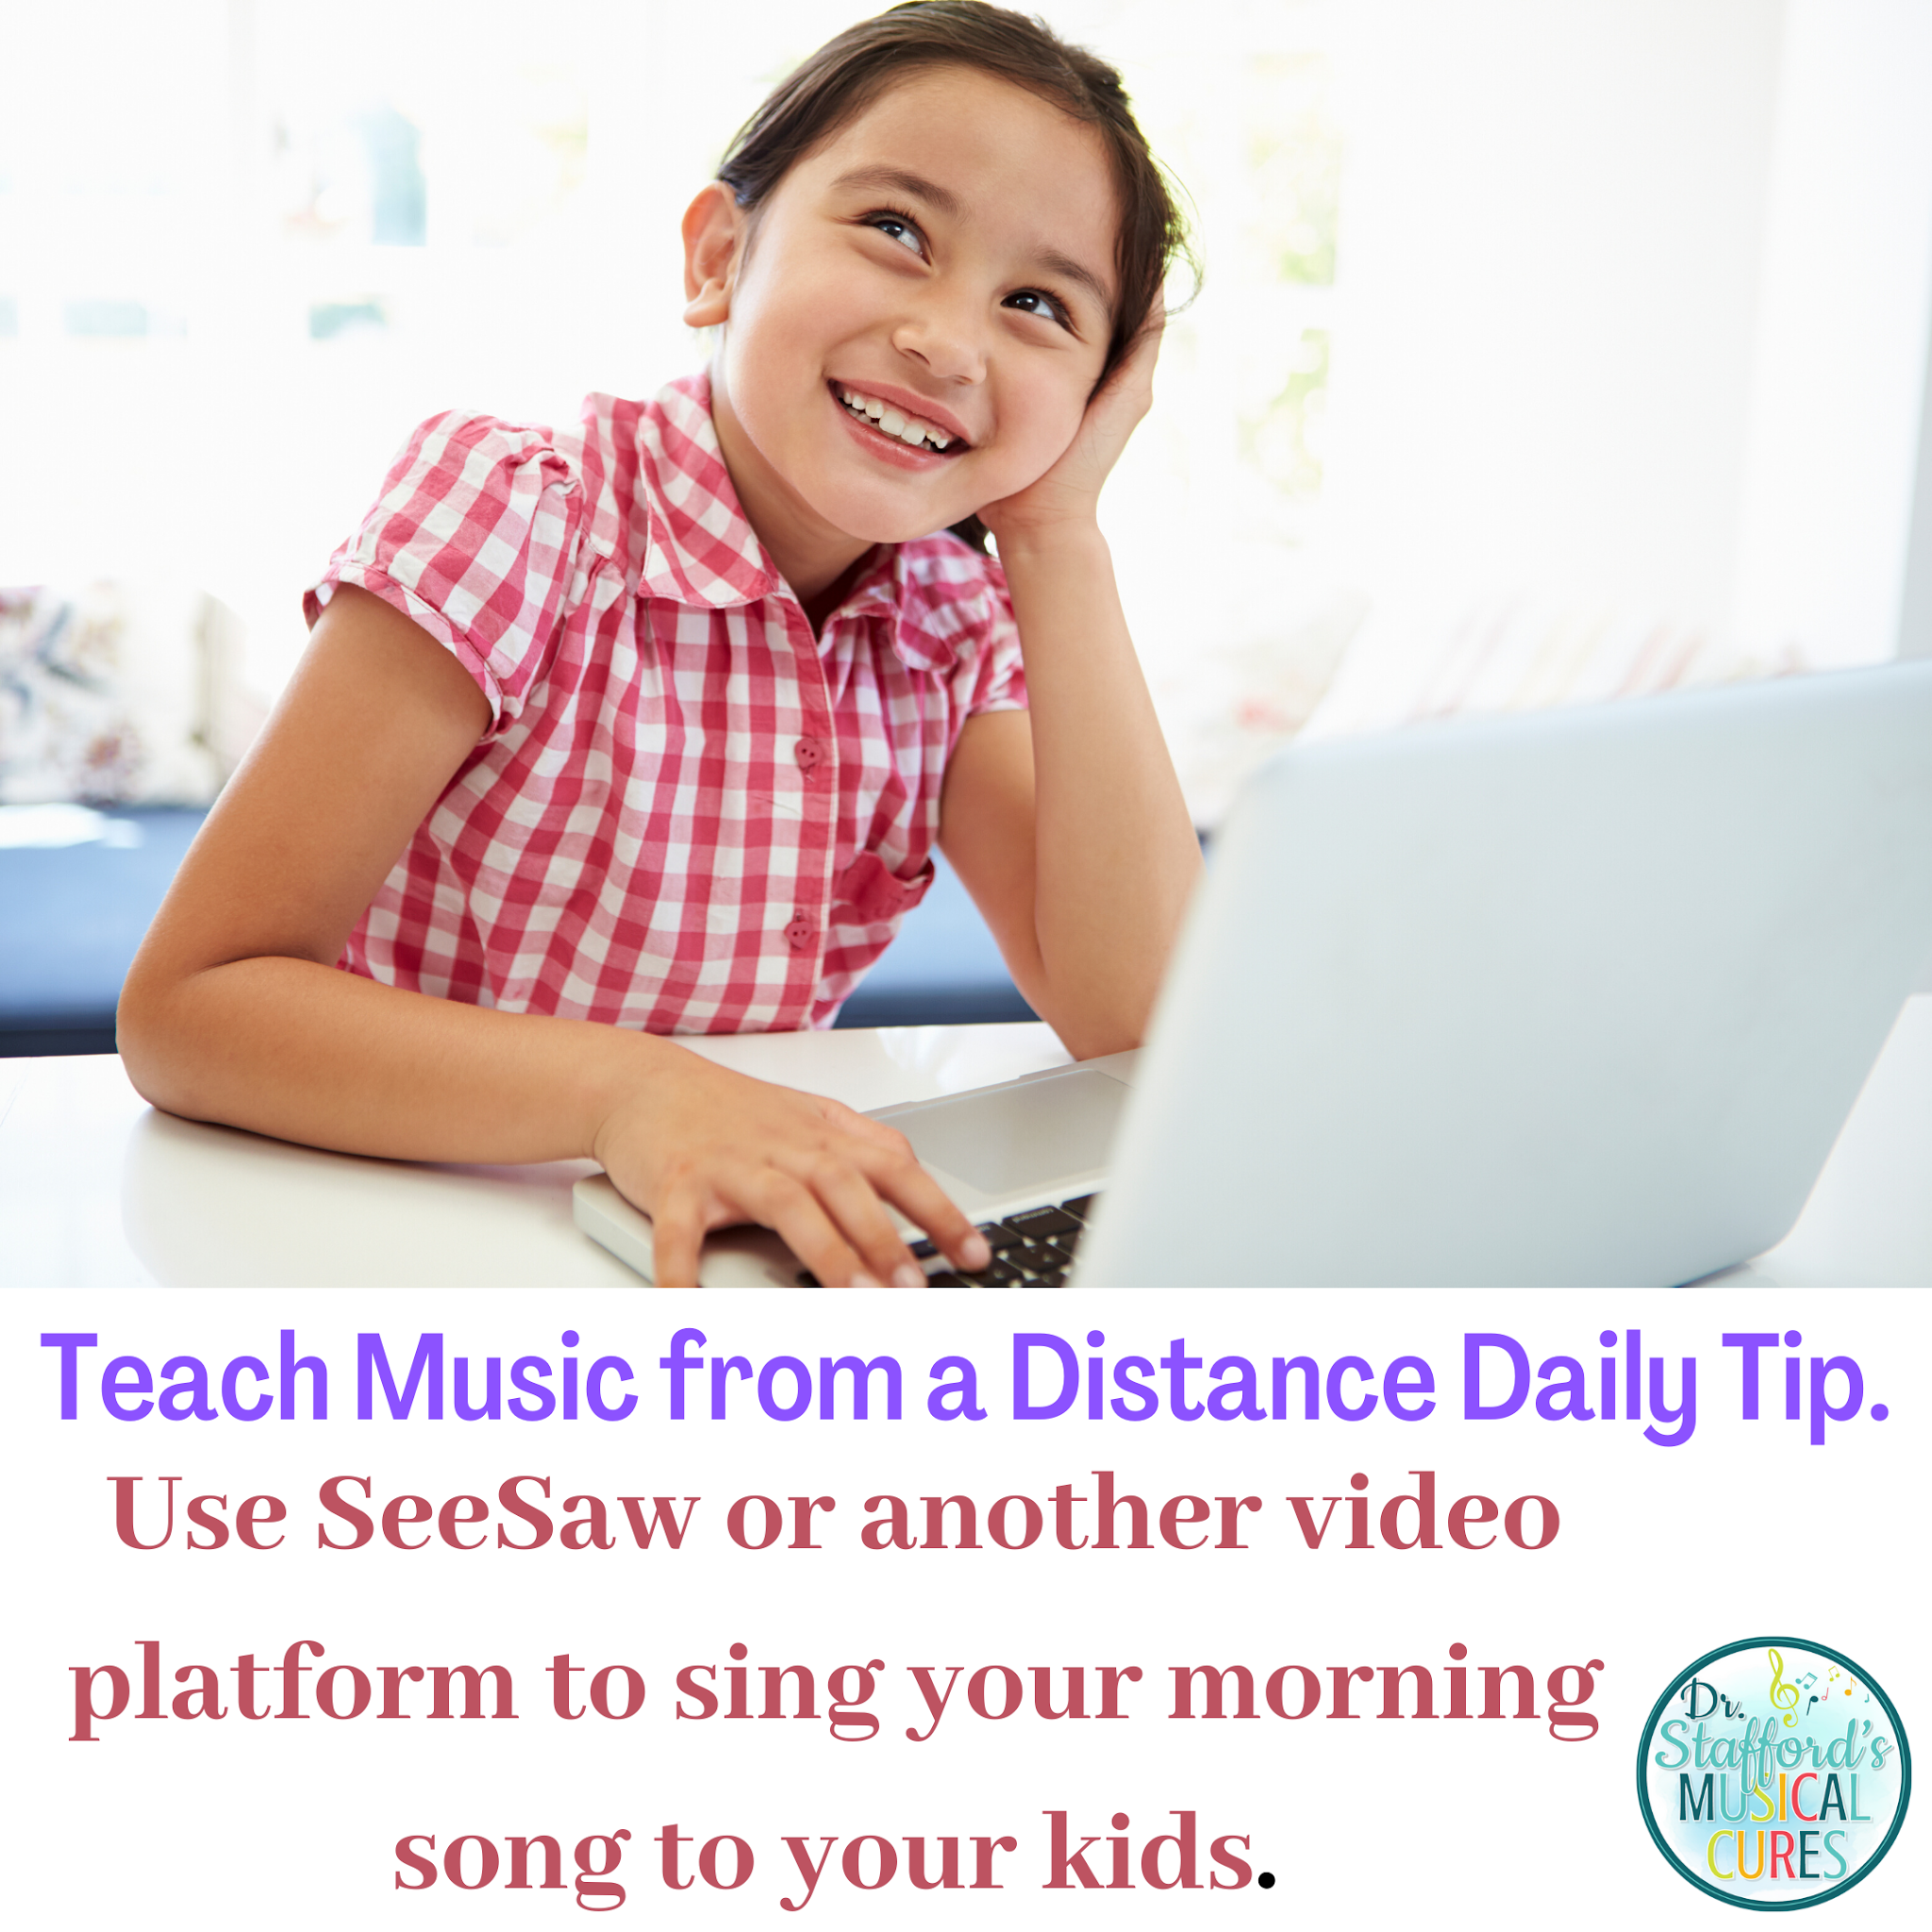 Distance learning tip.Teaching music from a distance: Use SeeSaw to sing your morning song to students